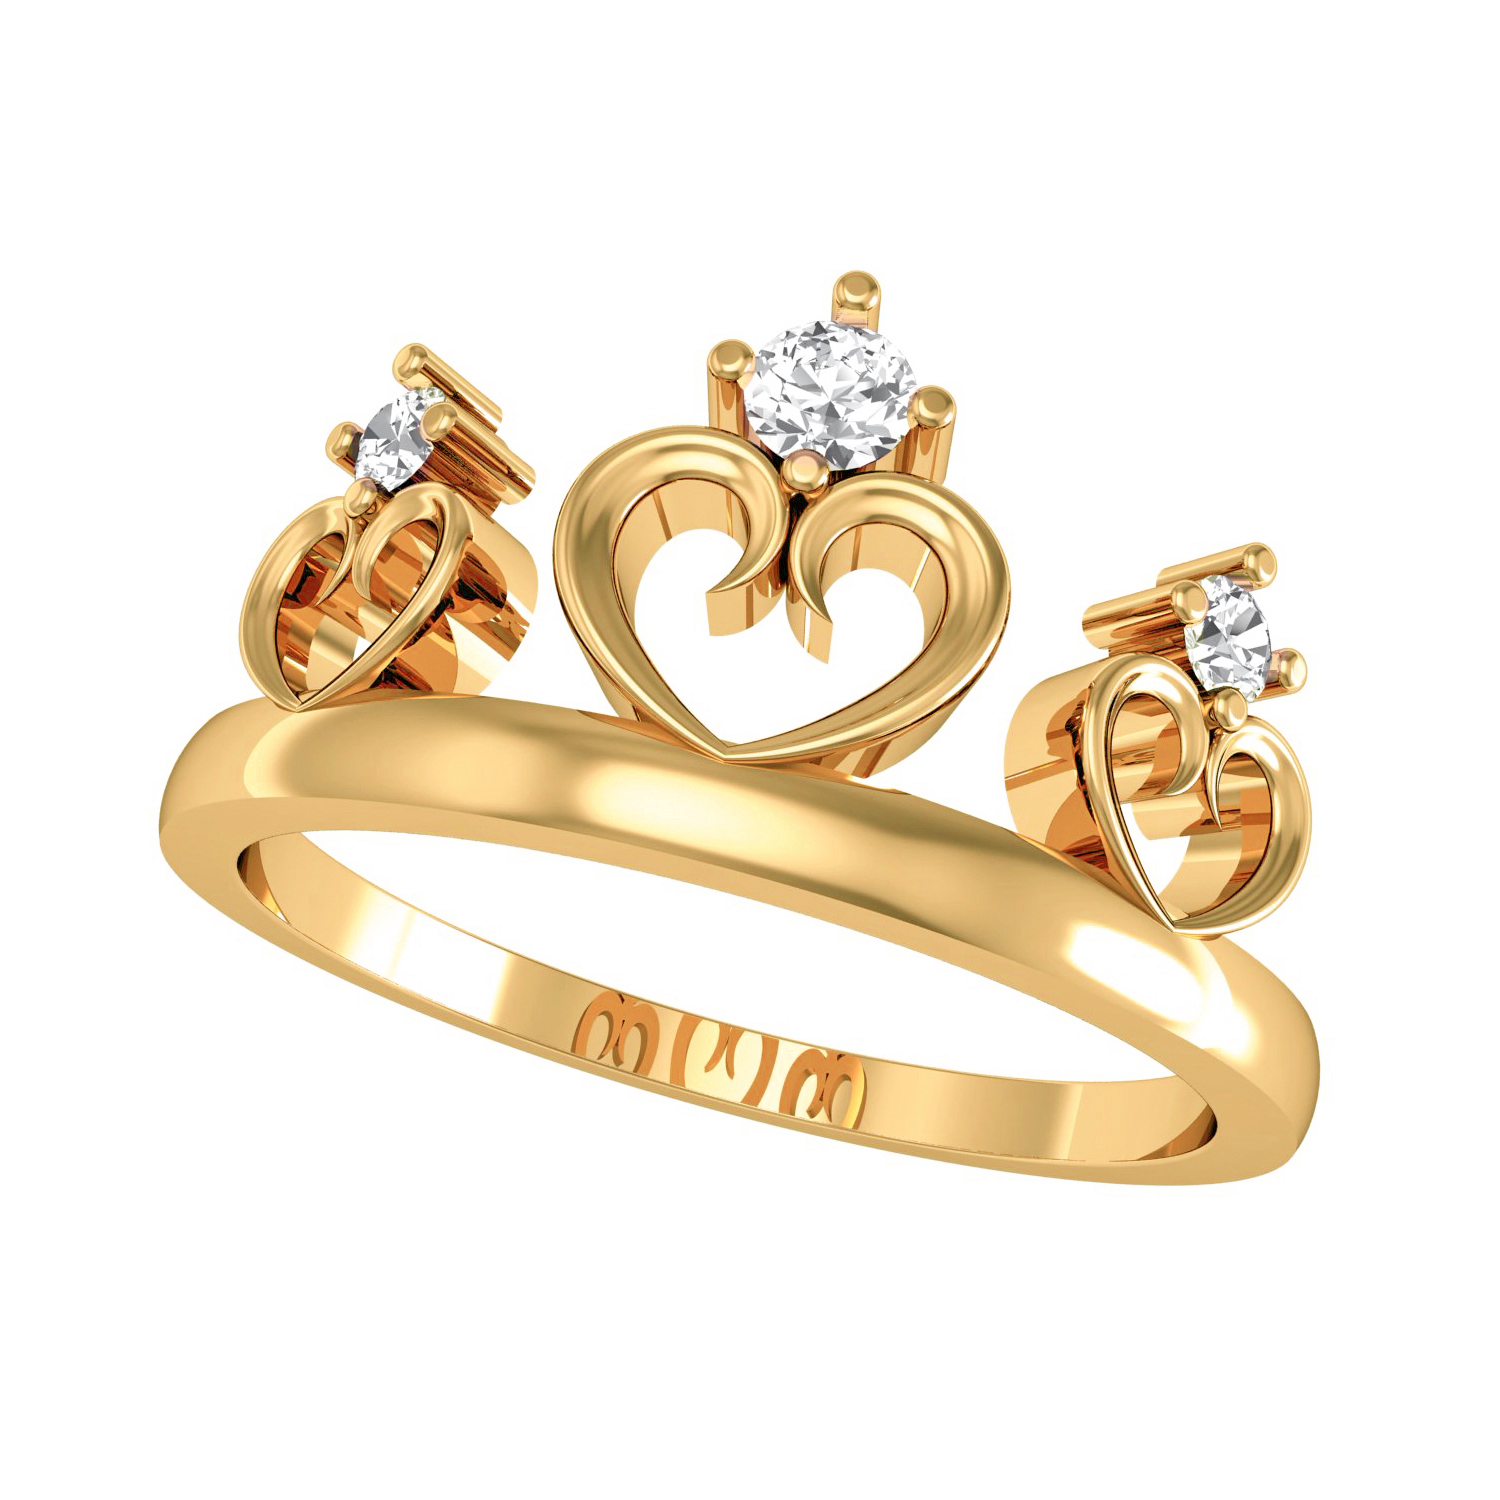 Certified Diamond Solid Gold Ring